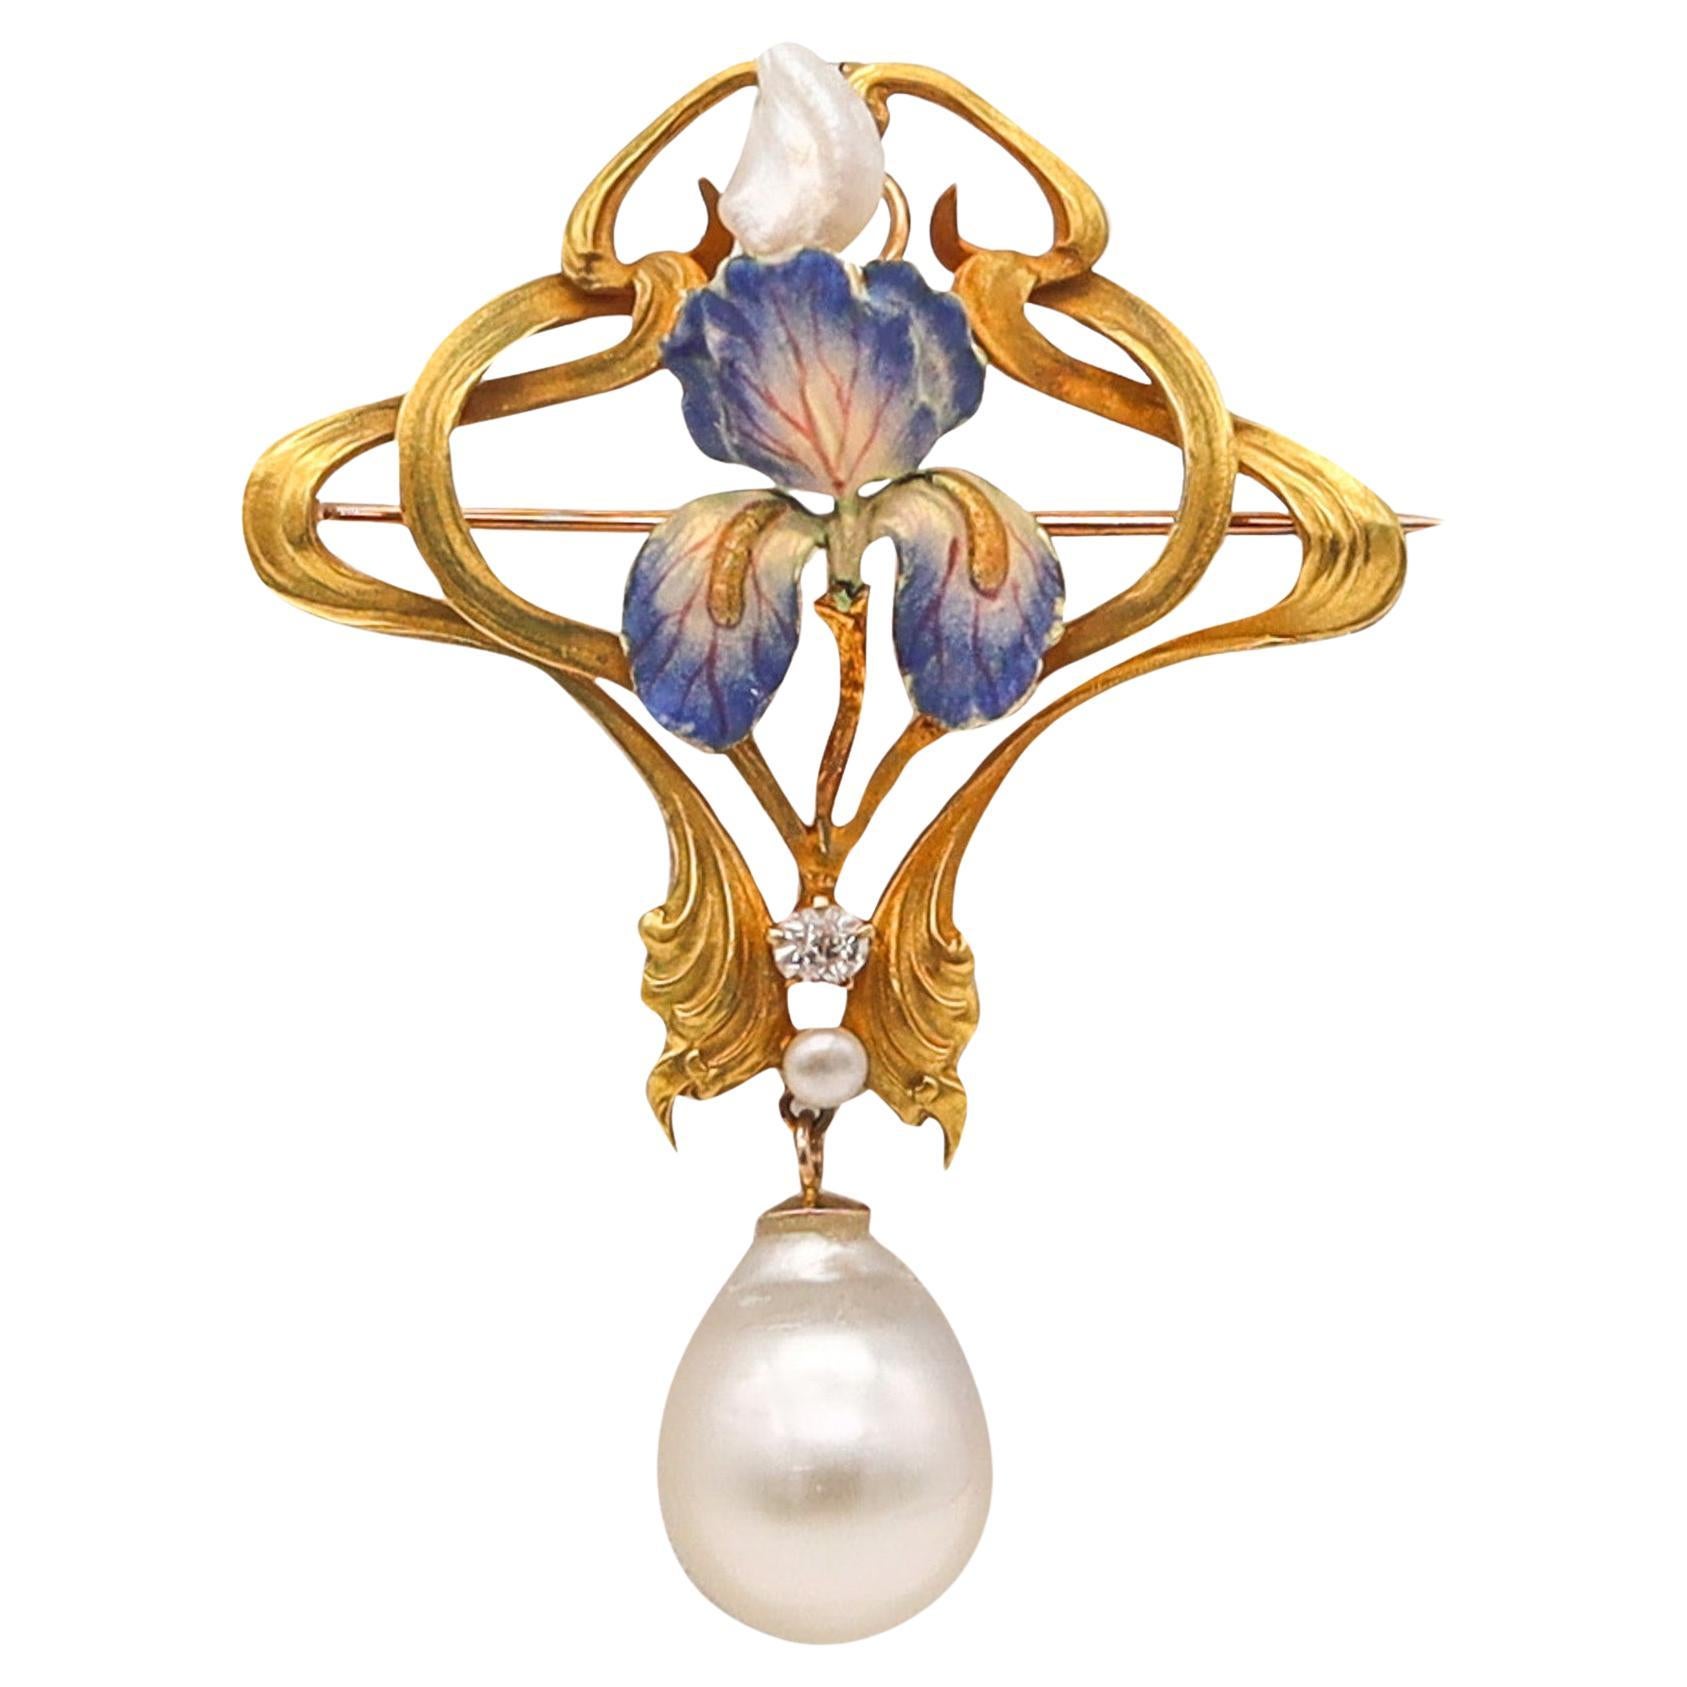 Art Nouveau 1900 Enamel Orchid Pendant In 14Kt Gold With Diamond And Pearls